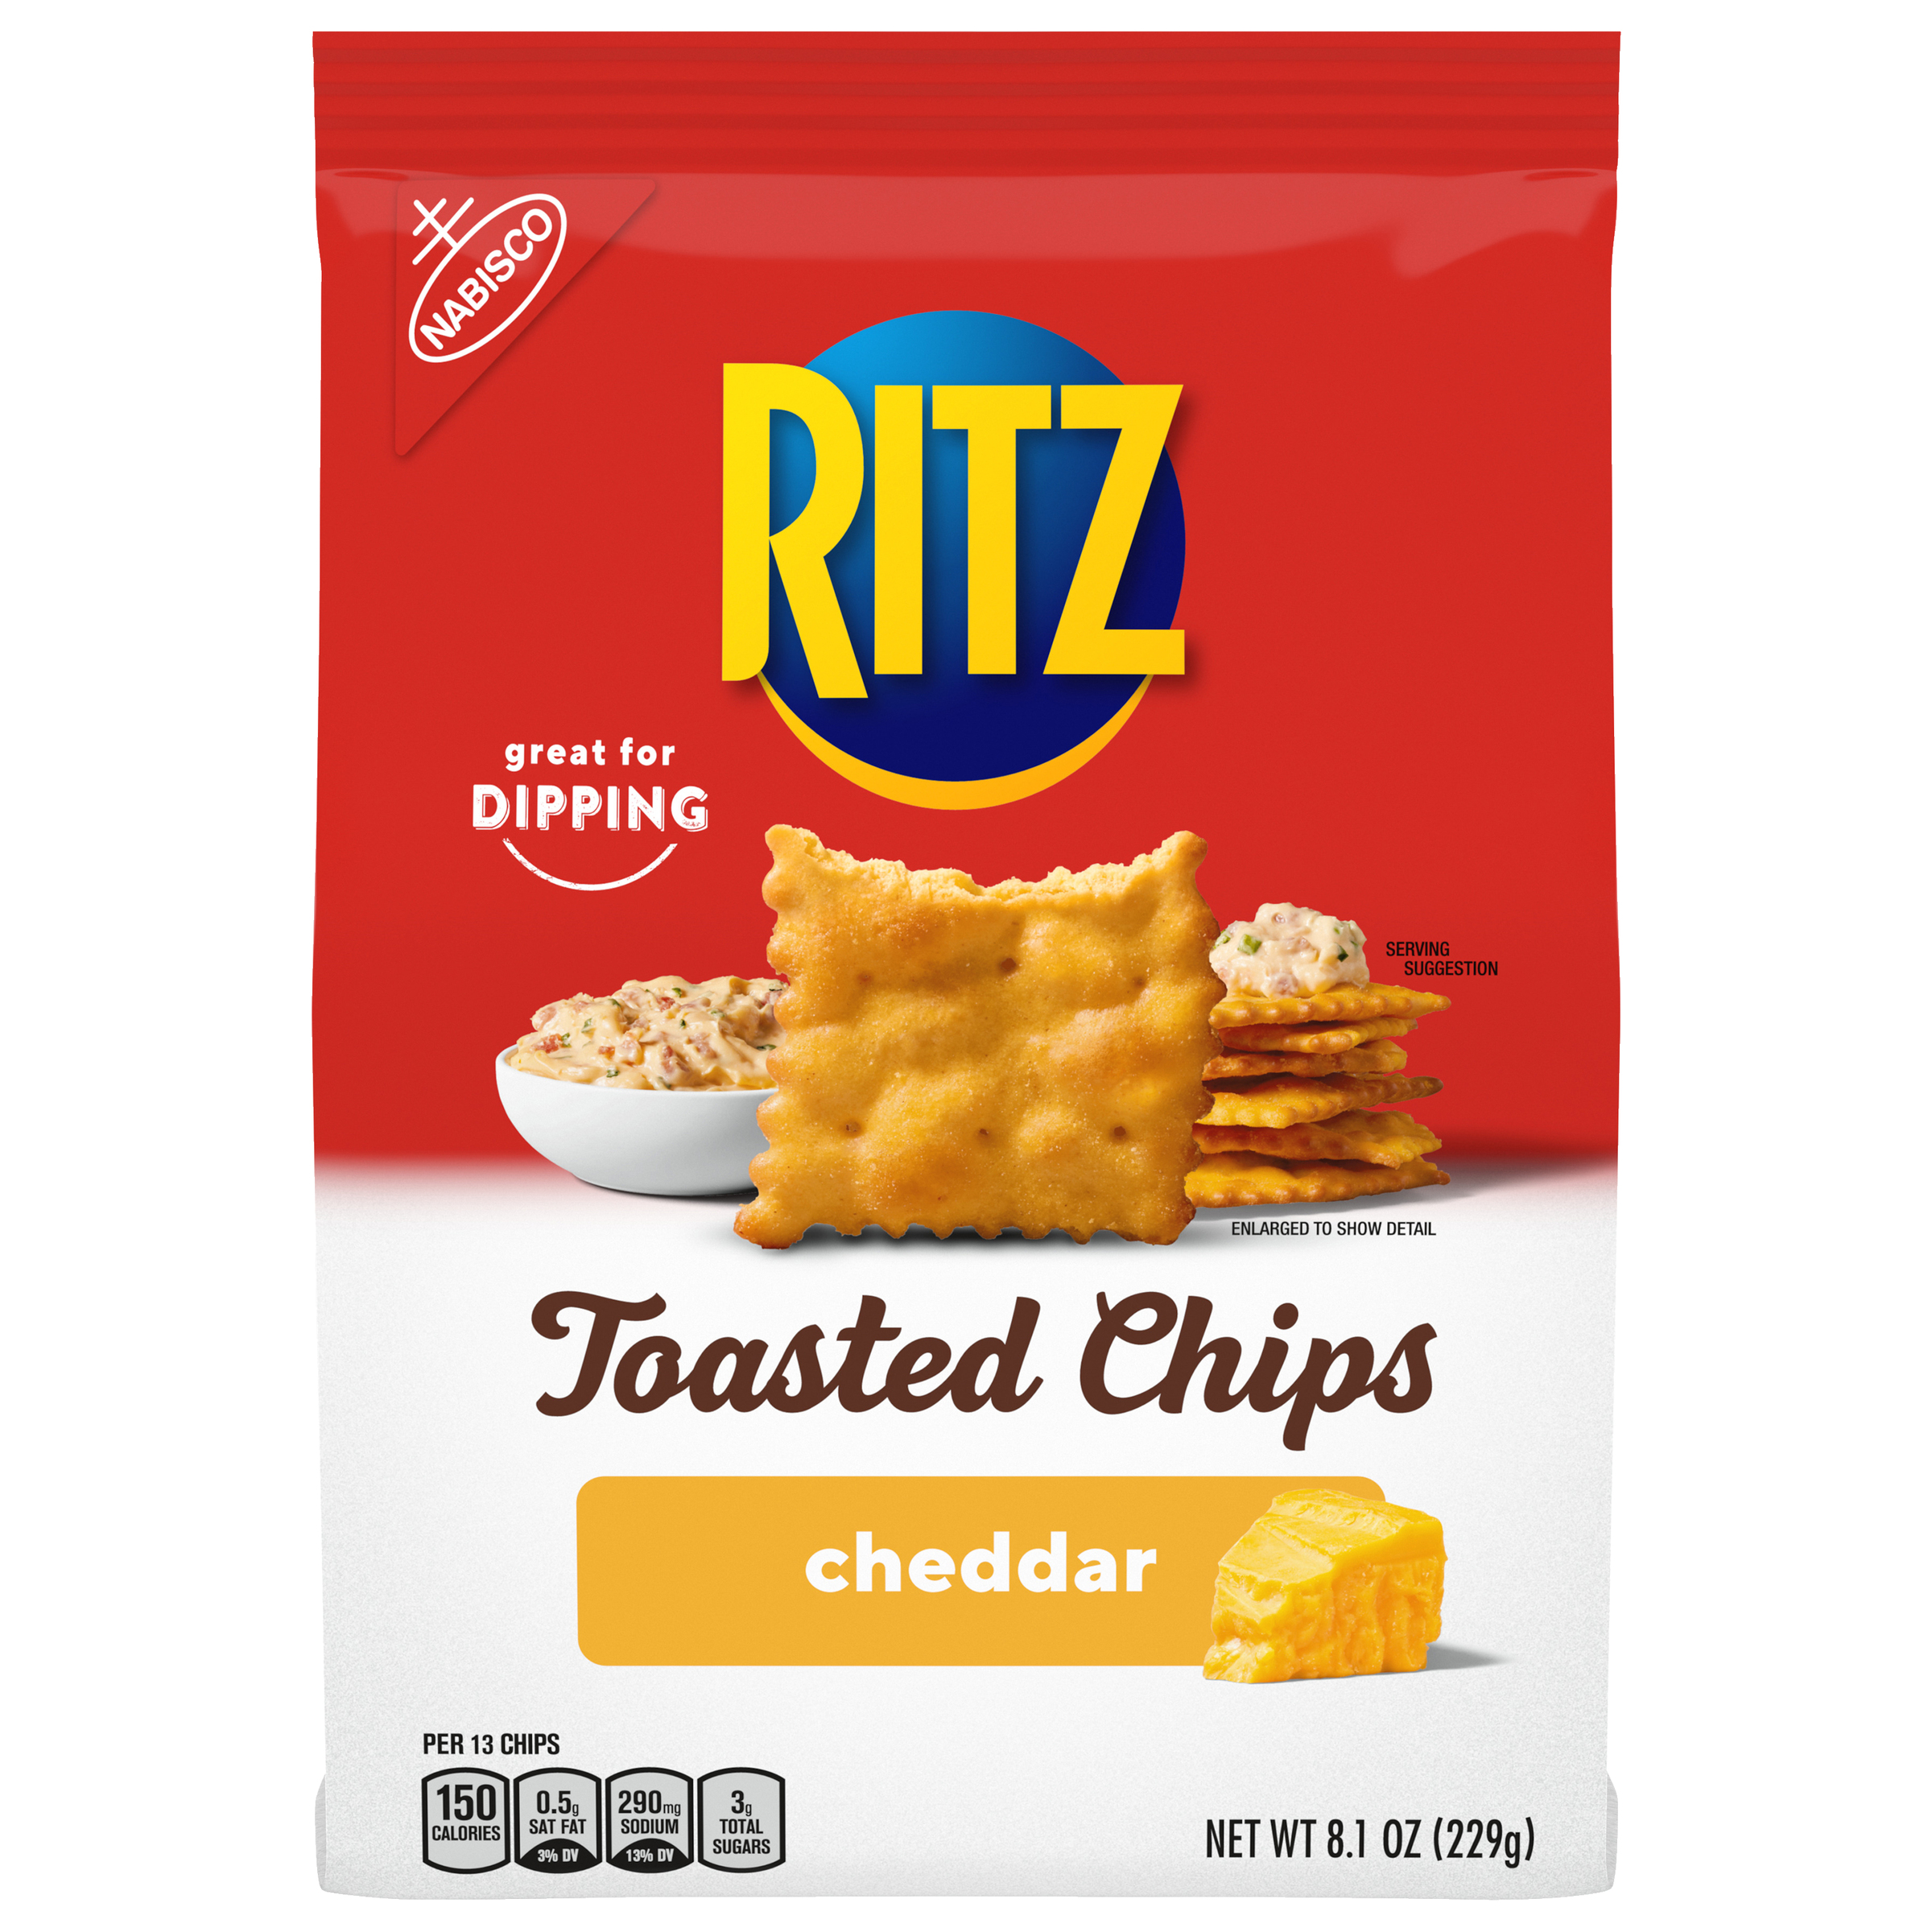 RITZ Toasted Chips Cheddar Crackers, 8.1 oz-0